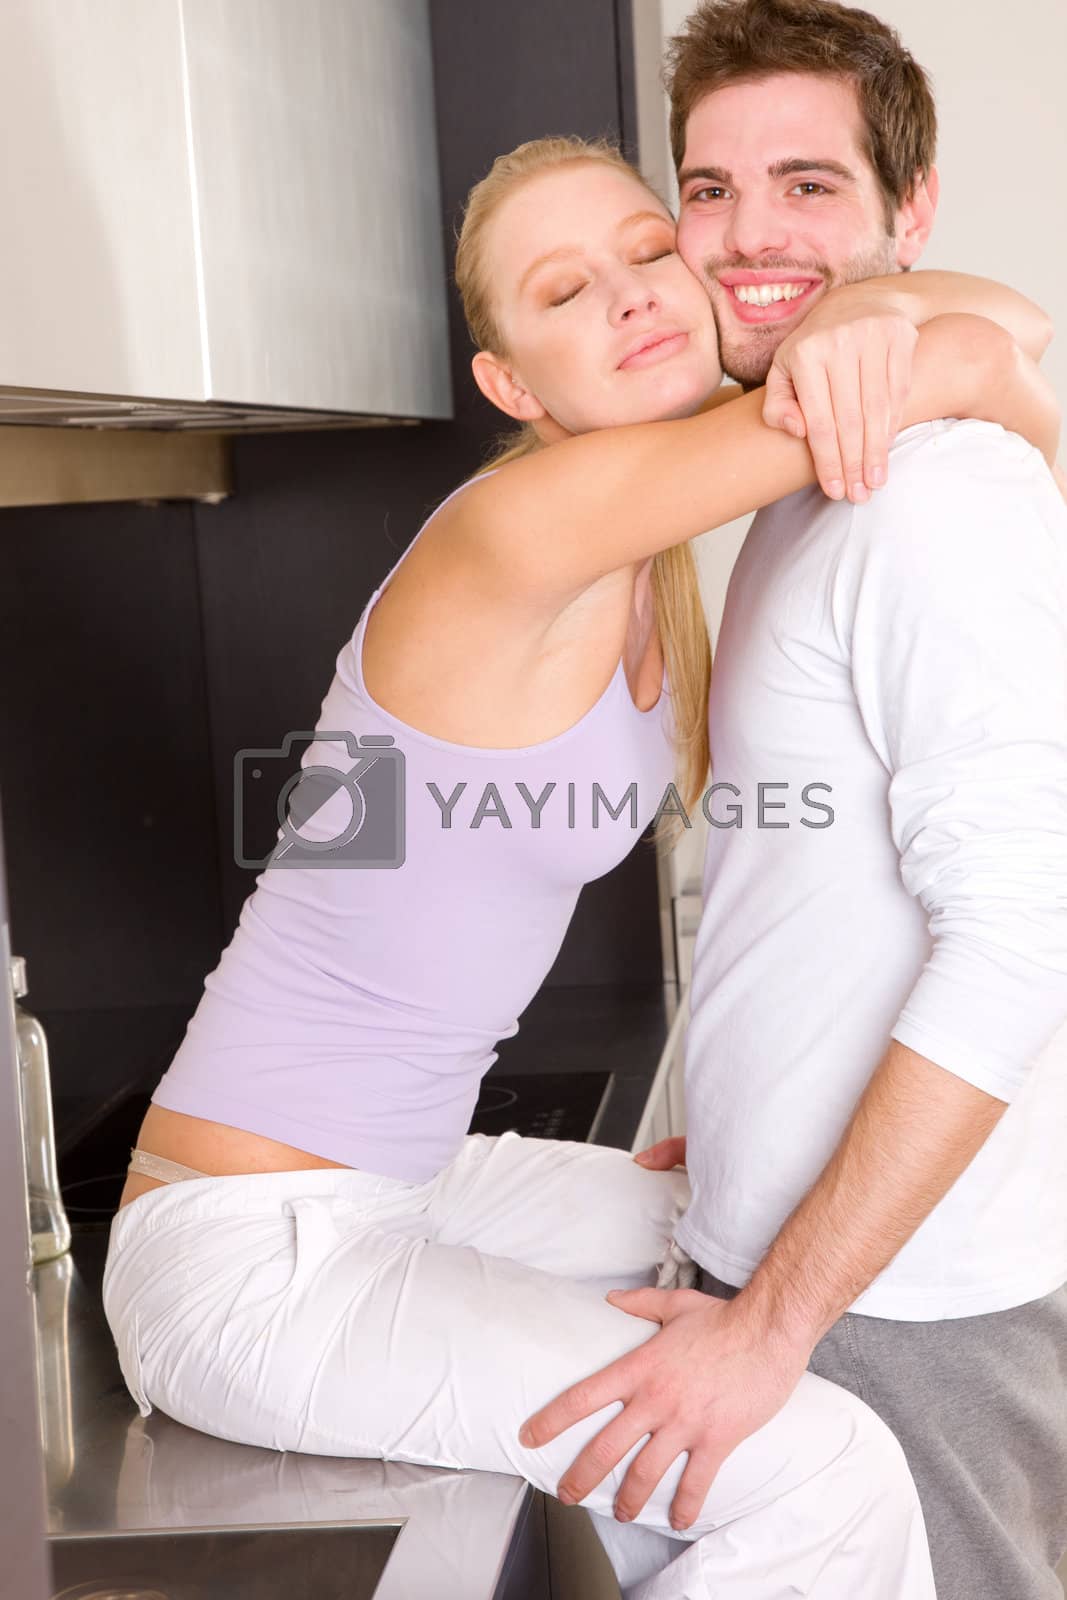 Royalty free image of couple at home embracing by ambro